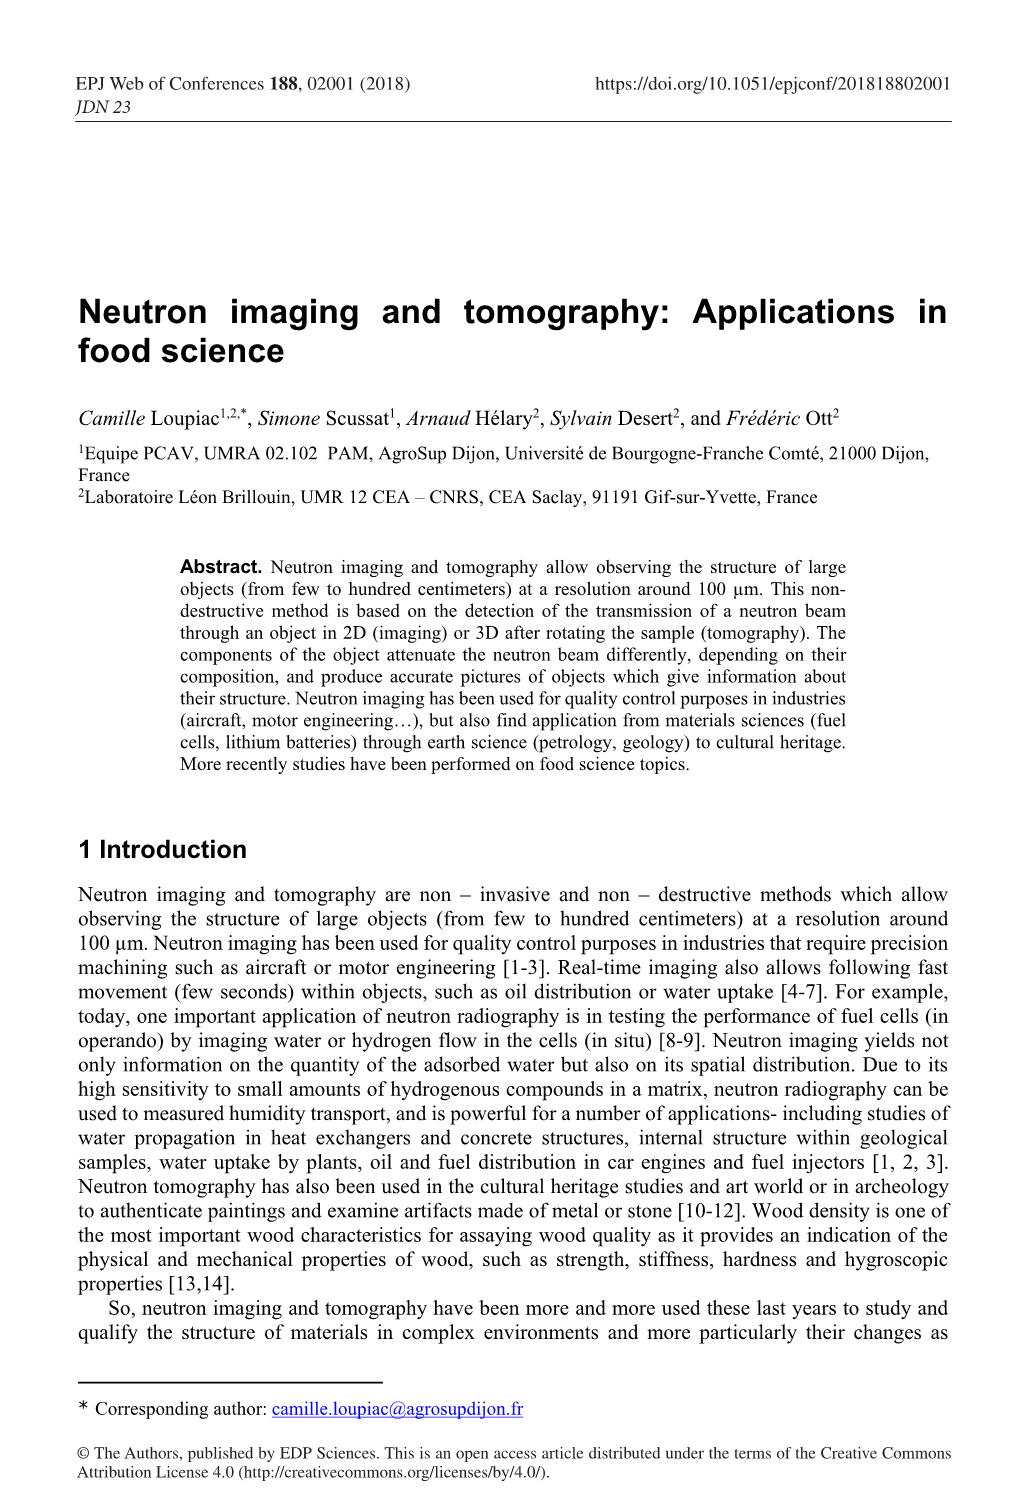 Neutron Imaging and Tomography: Applications in Food Science